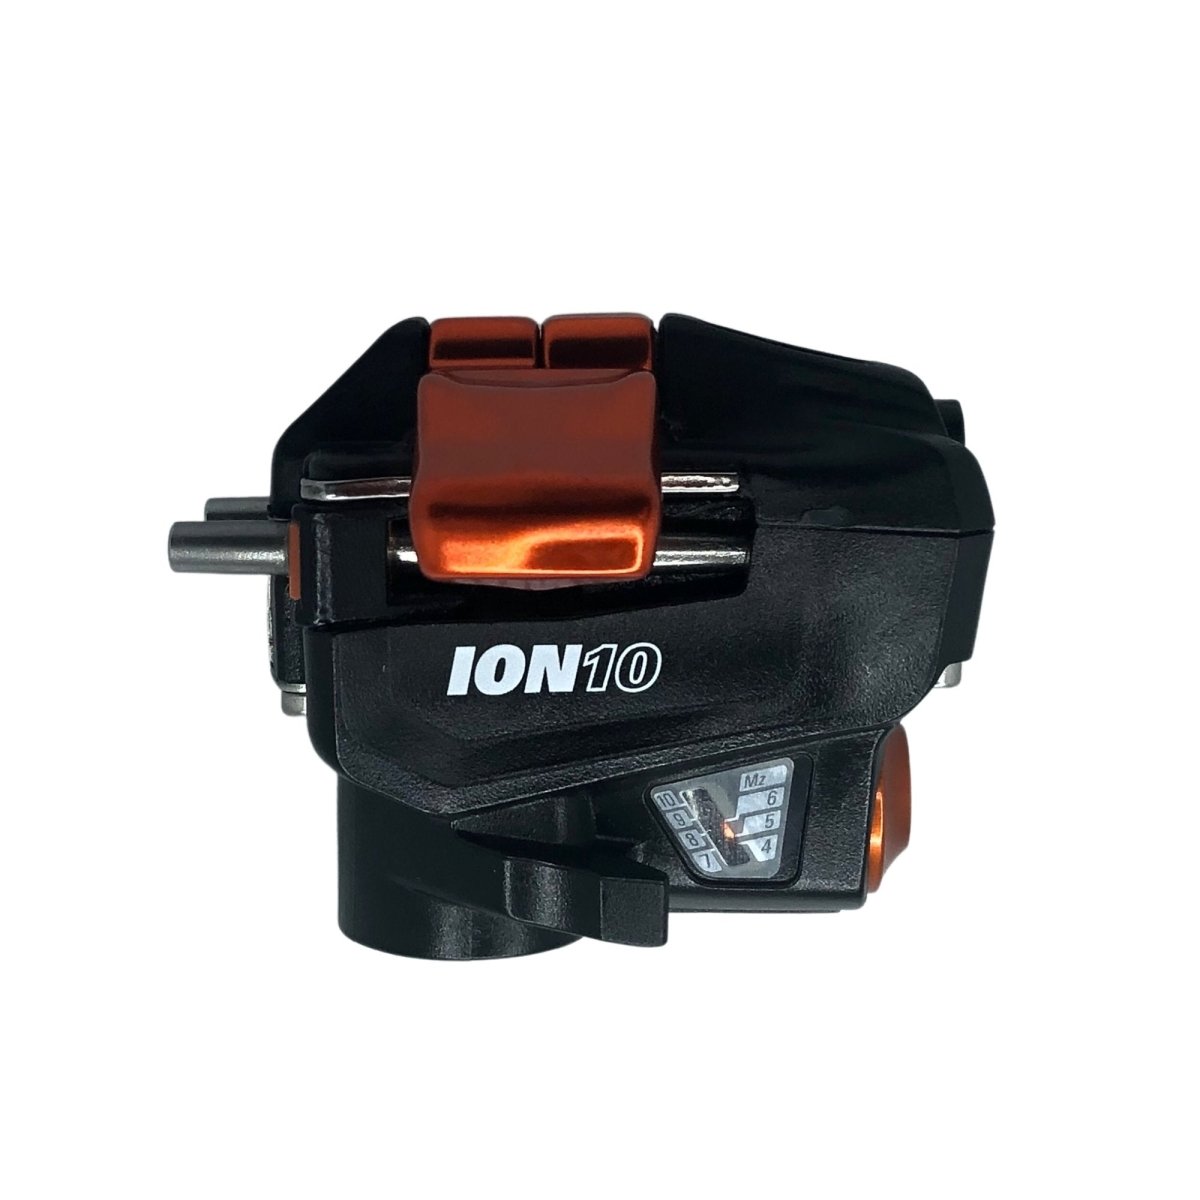 ION 10 Heel Turret Assembly (Black) - Parts - G3 Store [CAD]